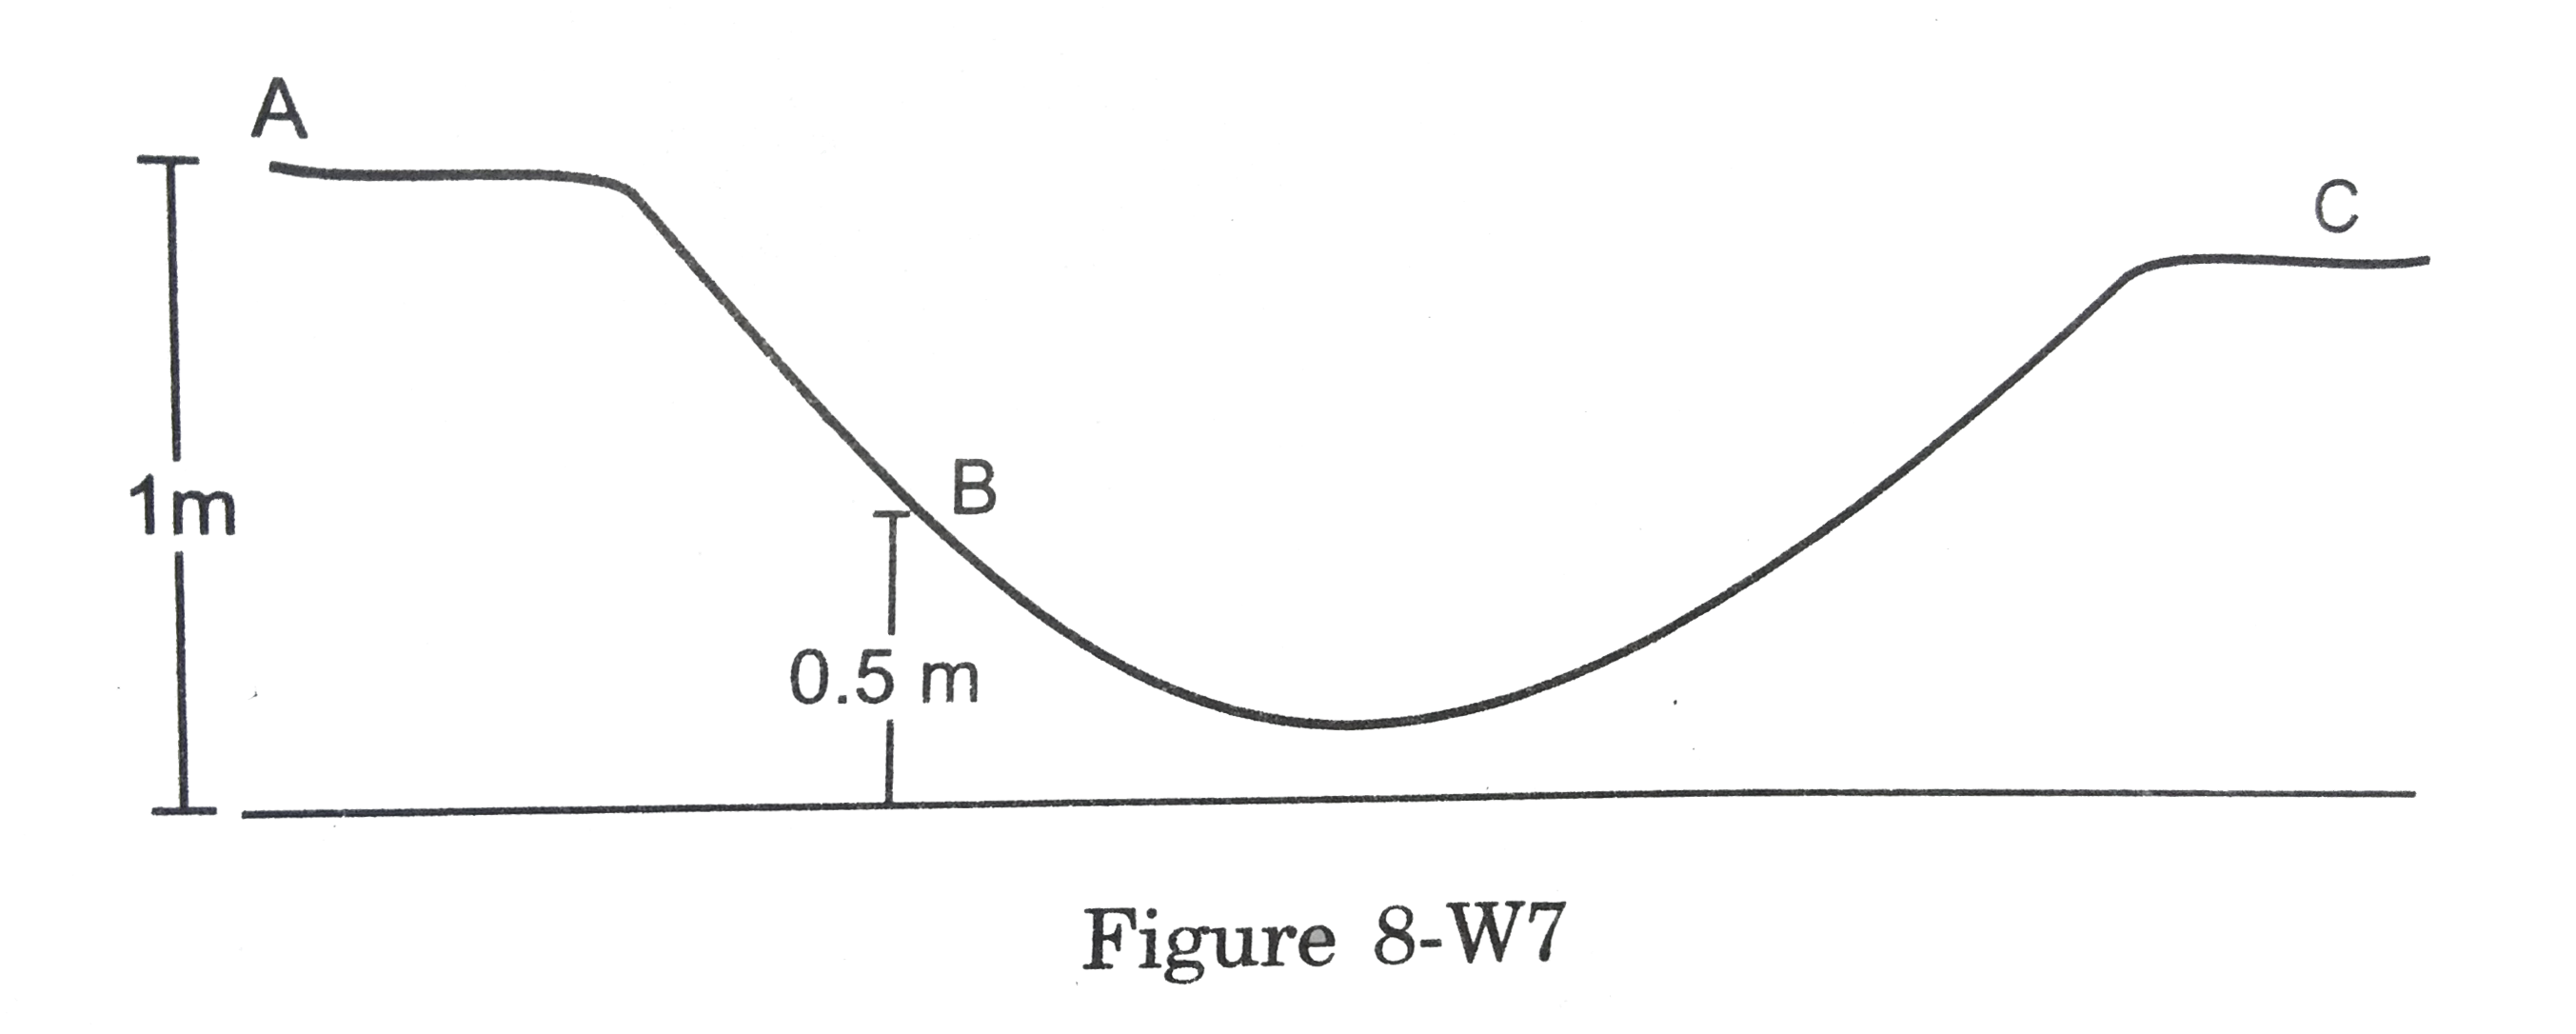 A particle is placed at the point A of a frictionless track ABC as shown in figure. It is pushed slightly towards right. Find its speed when it reches the point B. Take g=10 m/s^2.